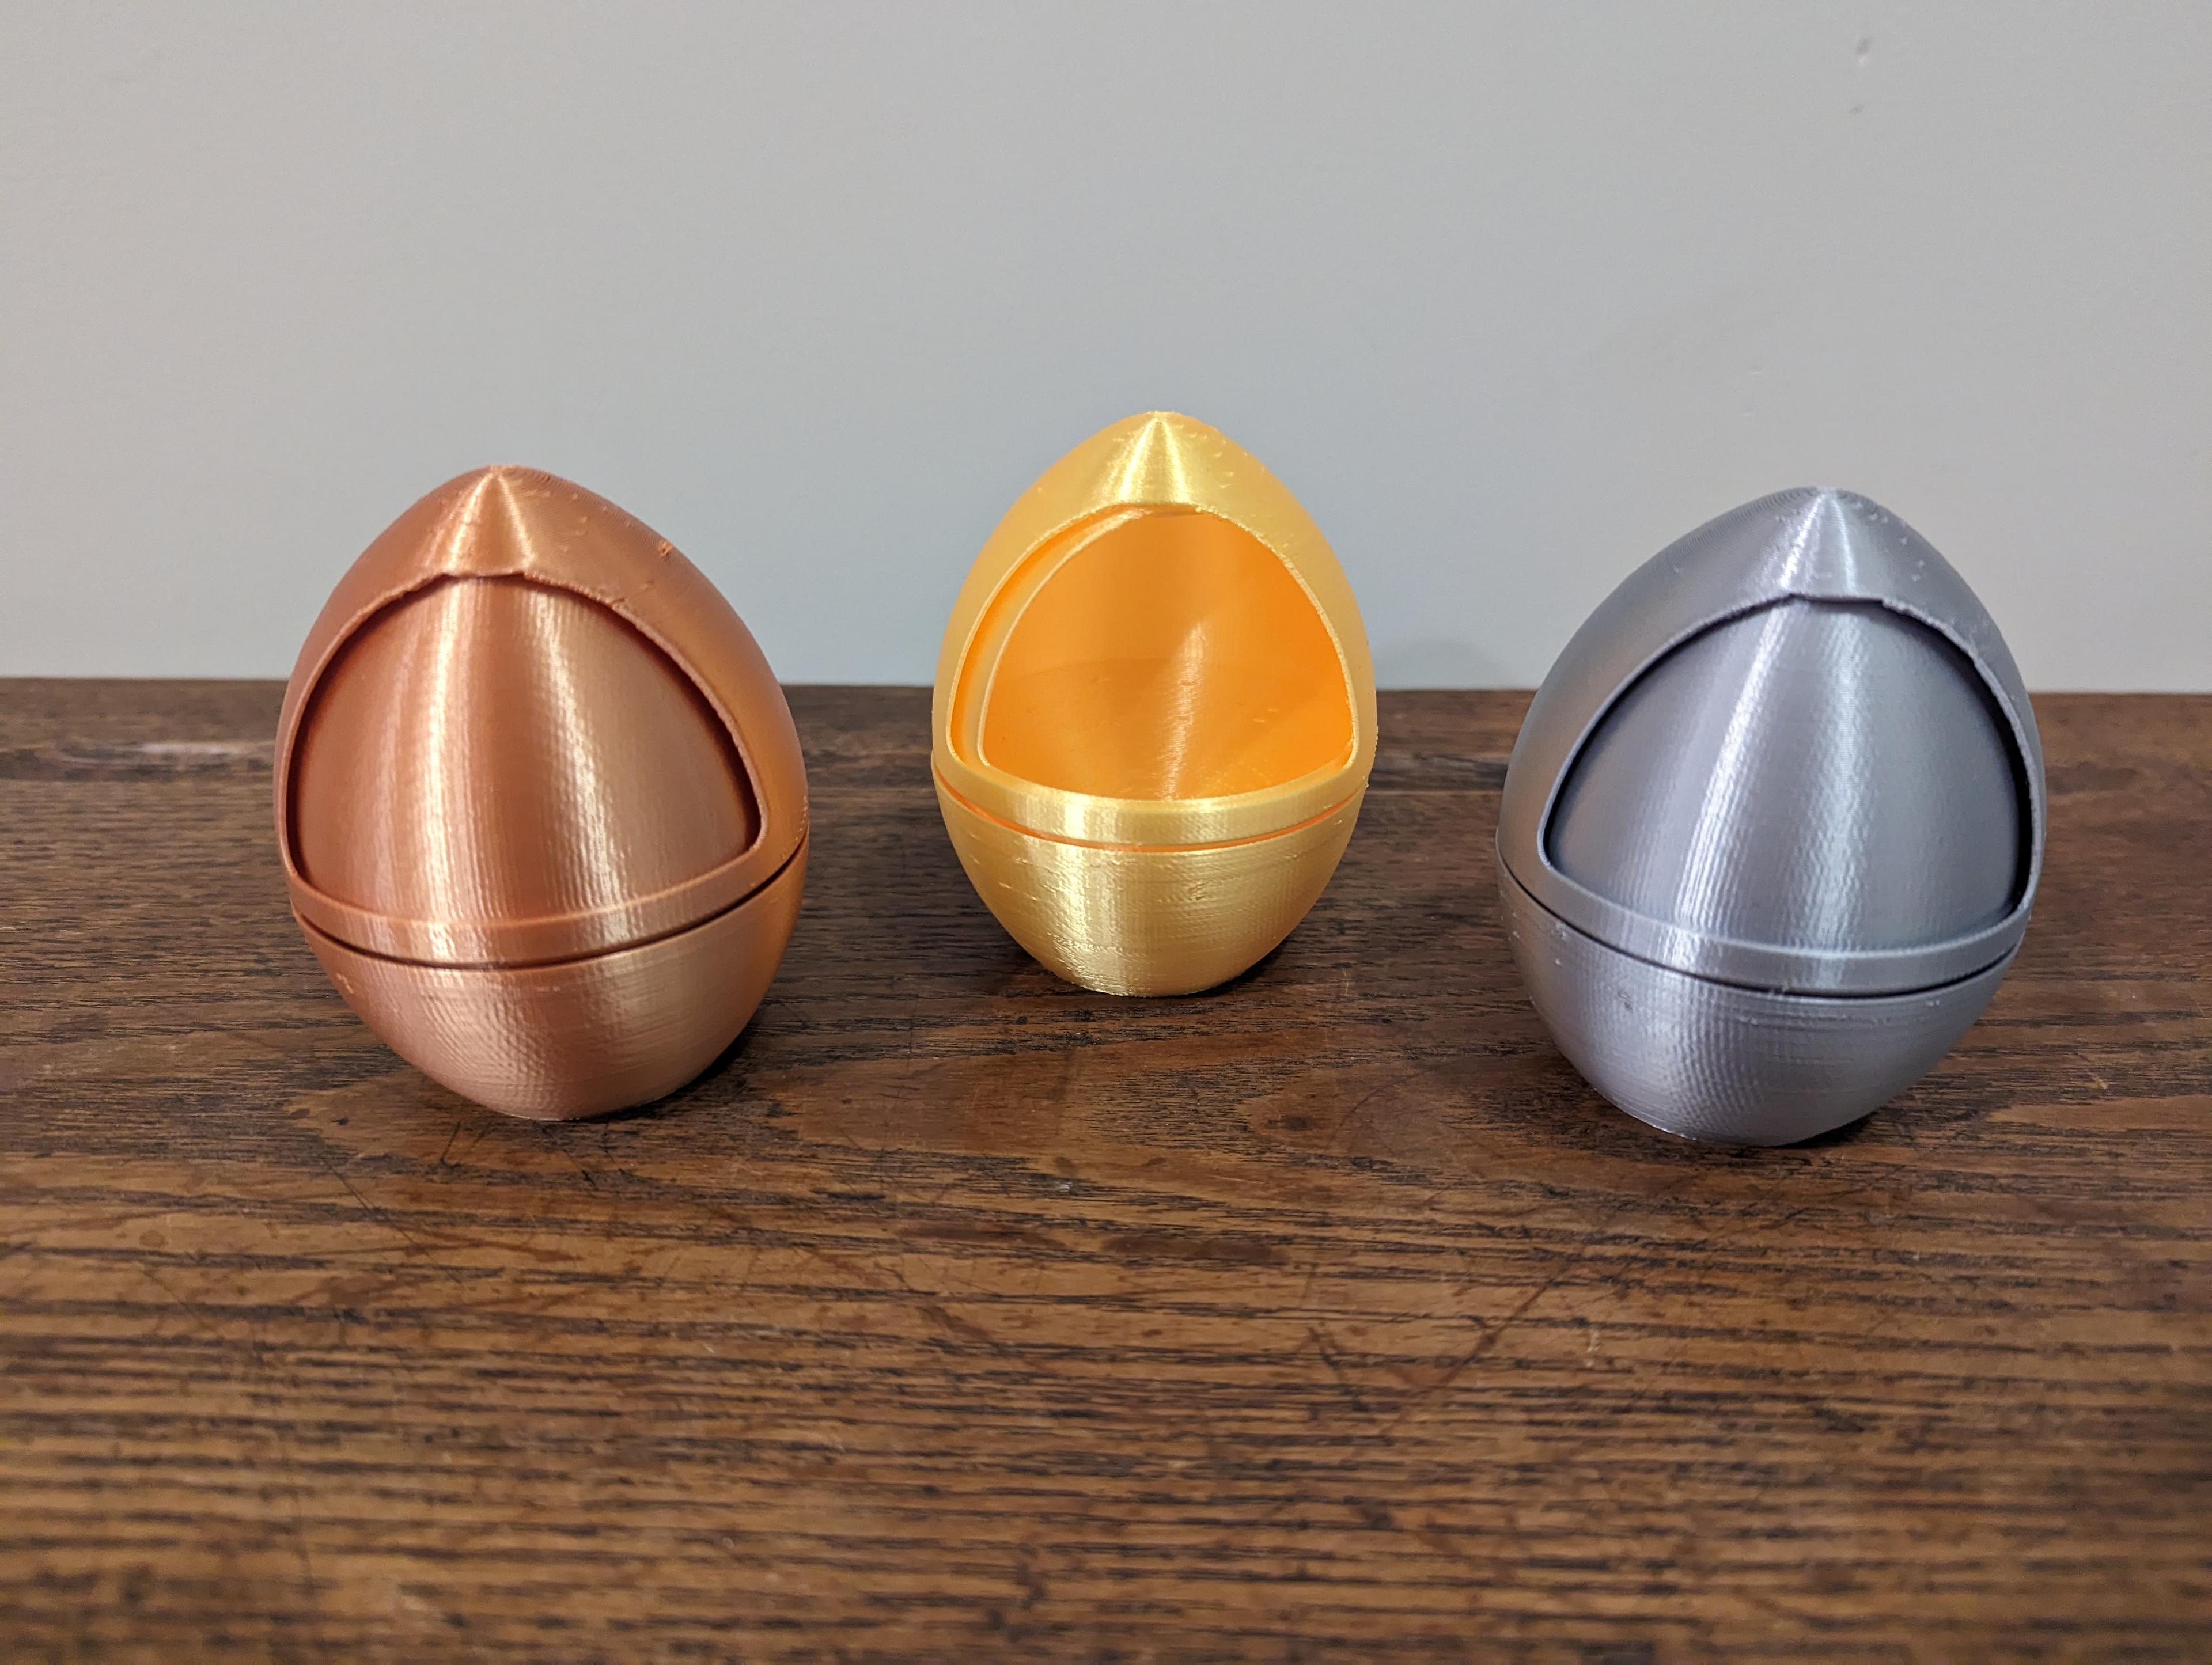 MINI PLANETARY EGG v2 - Printed on the KP3SPROS1 in Sliceworx Silk Copper, Gold, and Silver. - 3d model